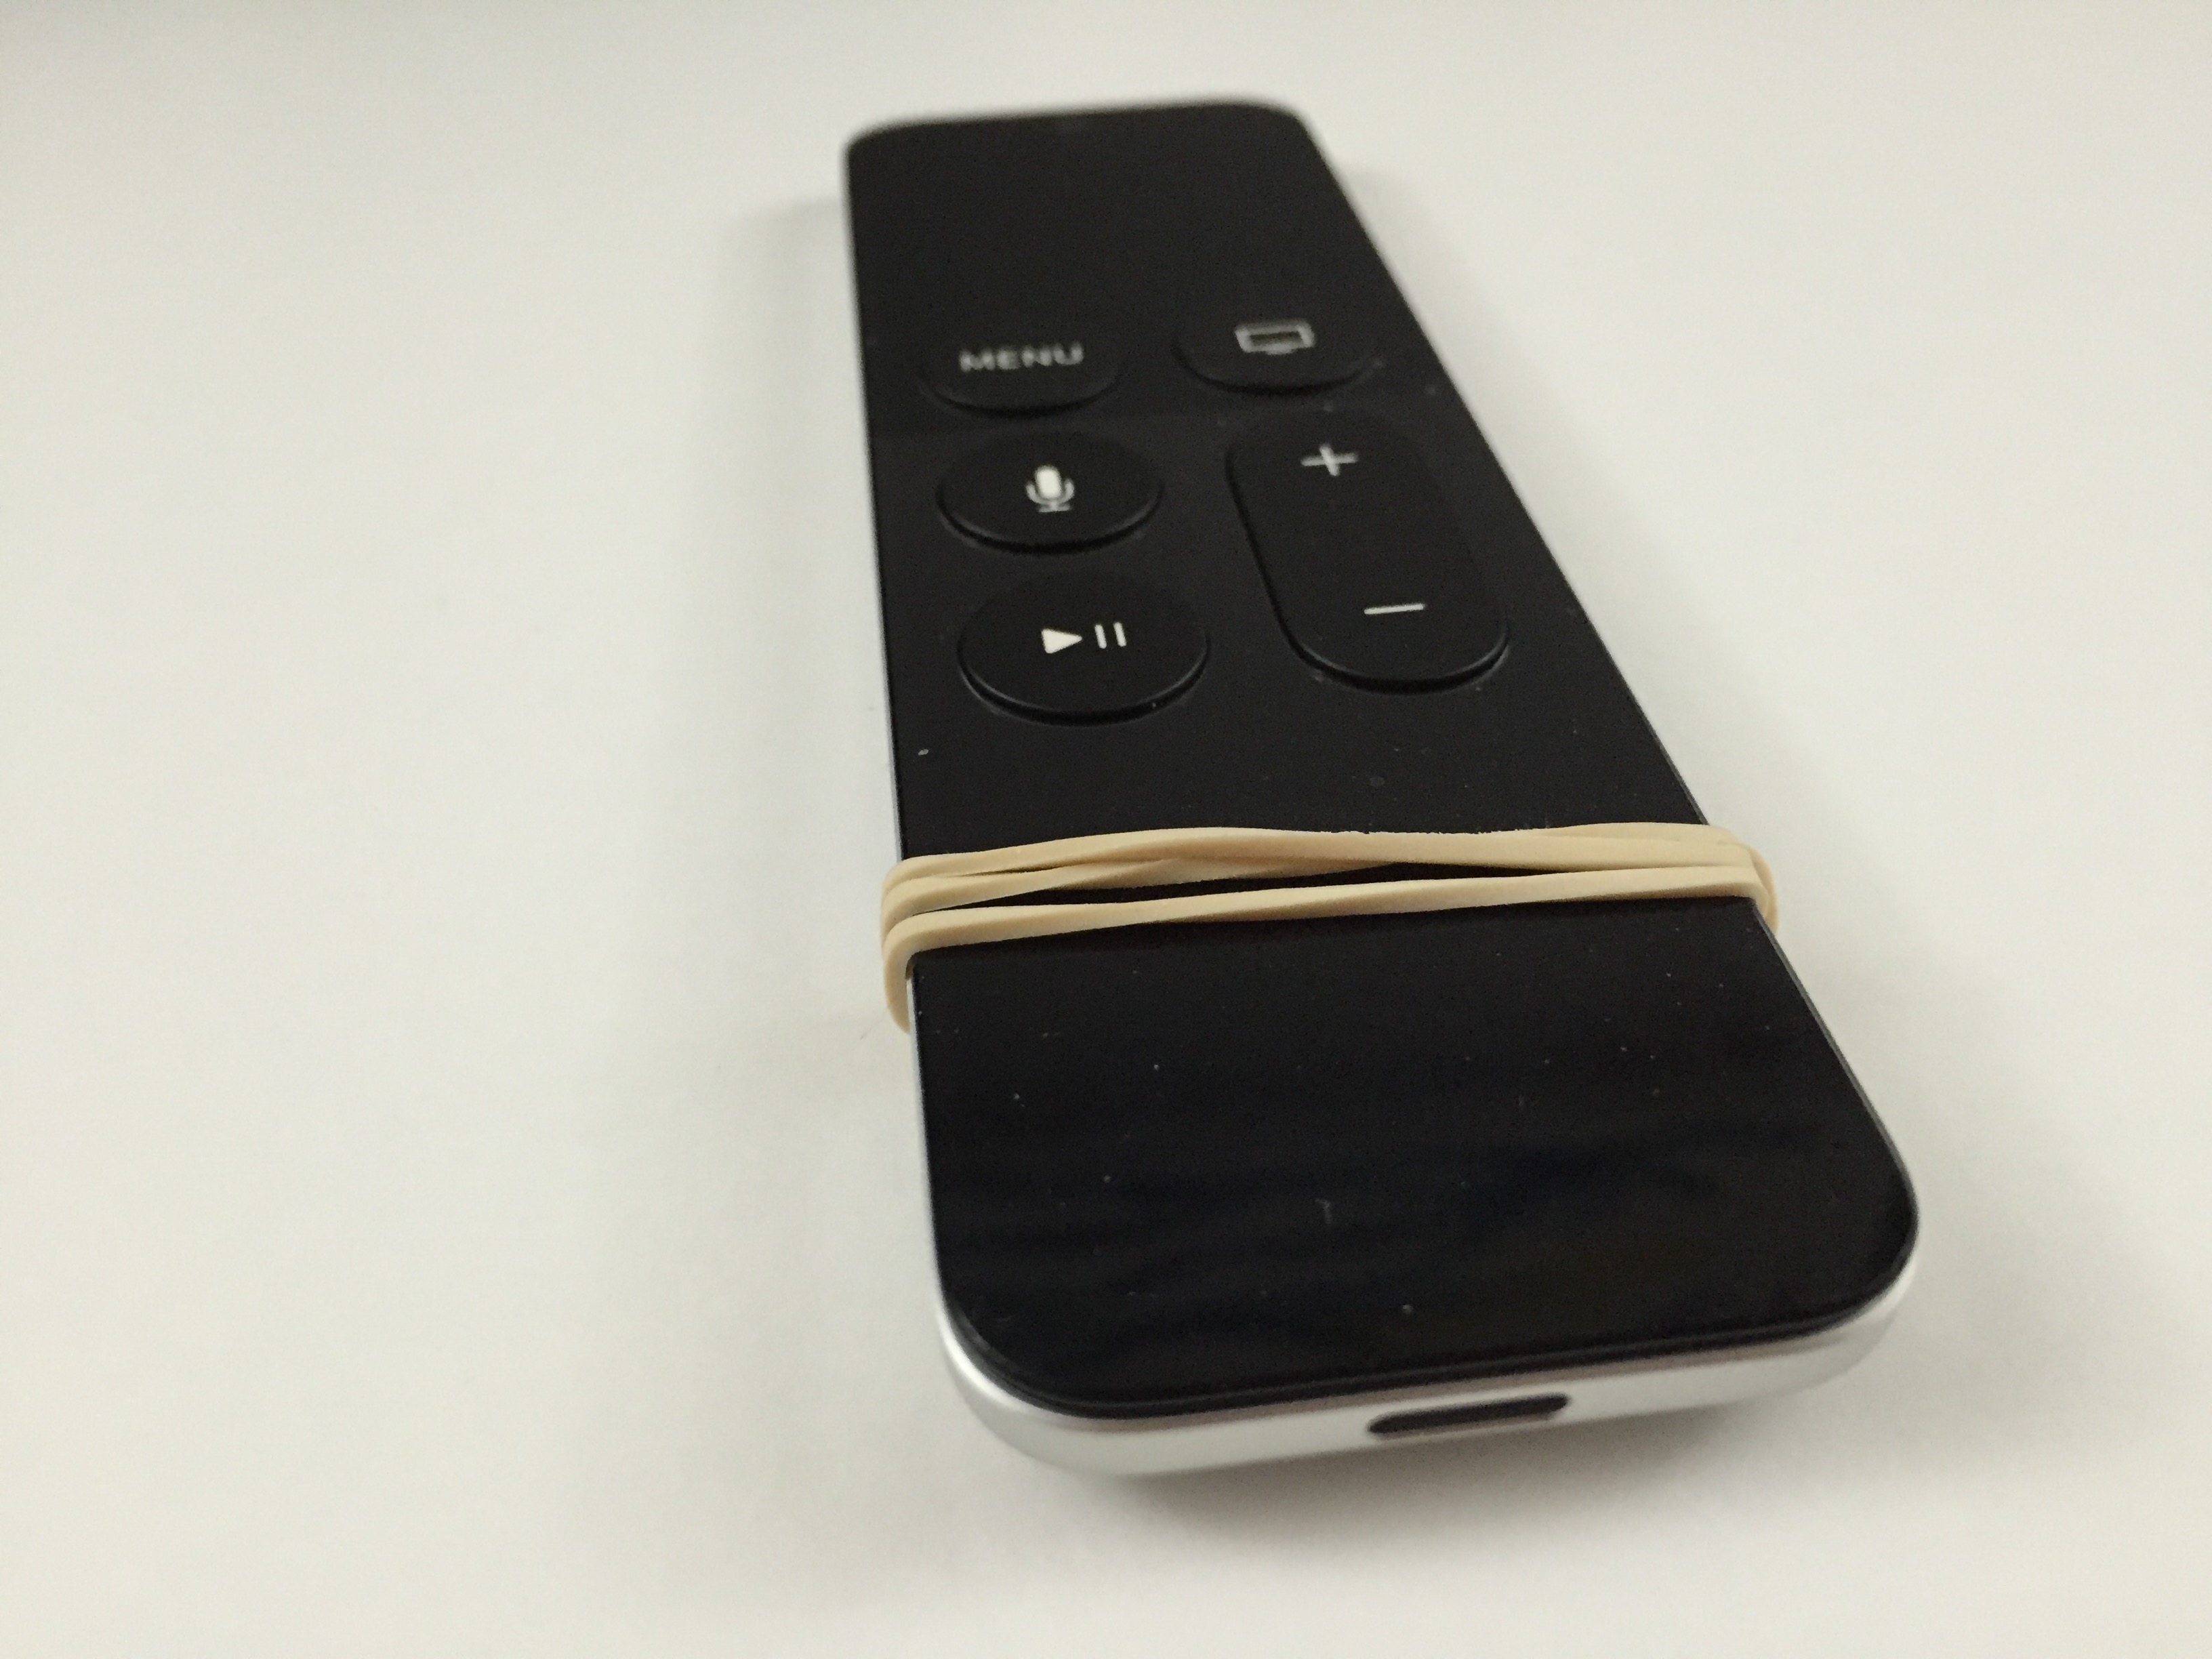 check apple tv remote battery charge